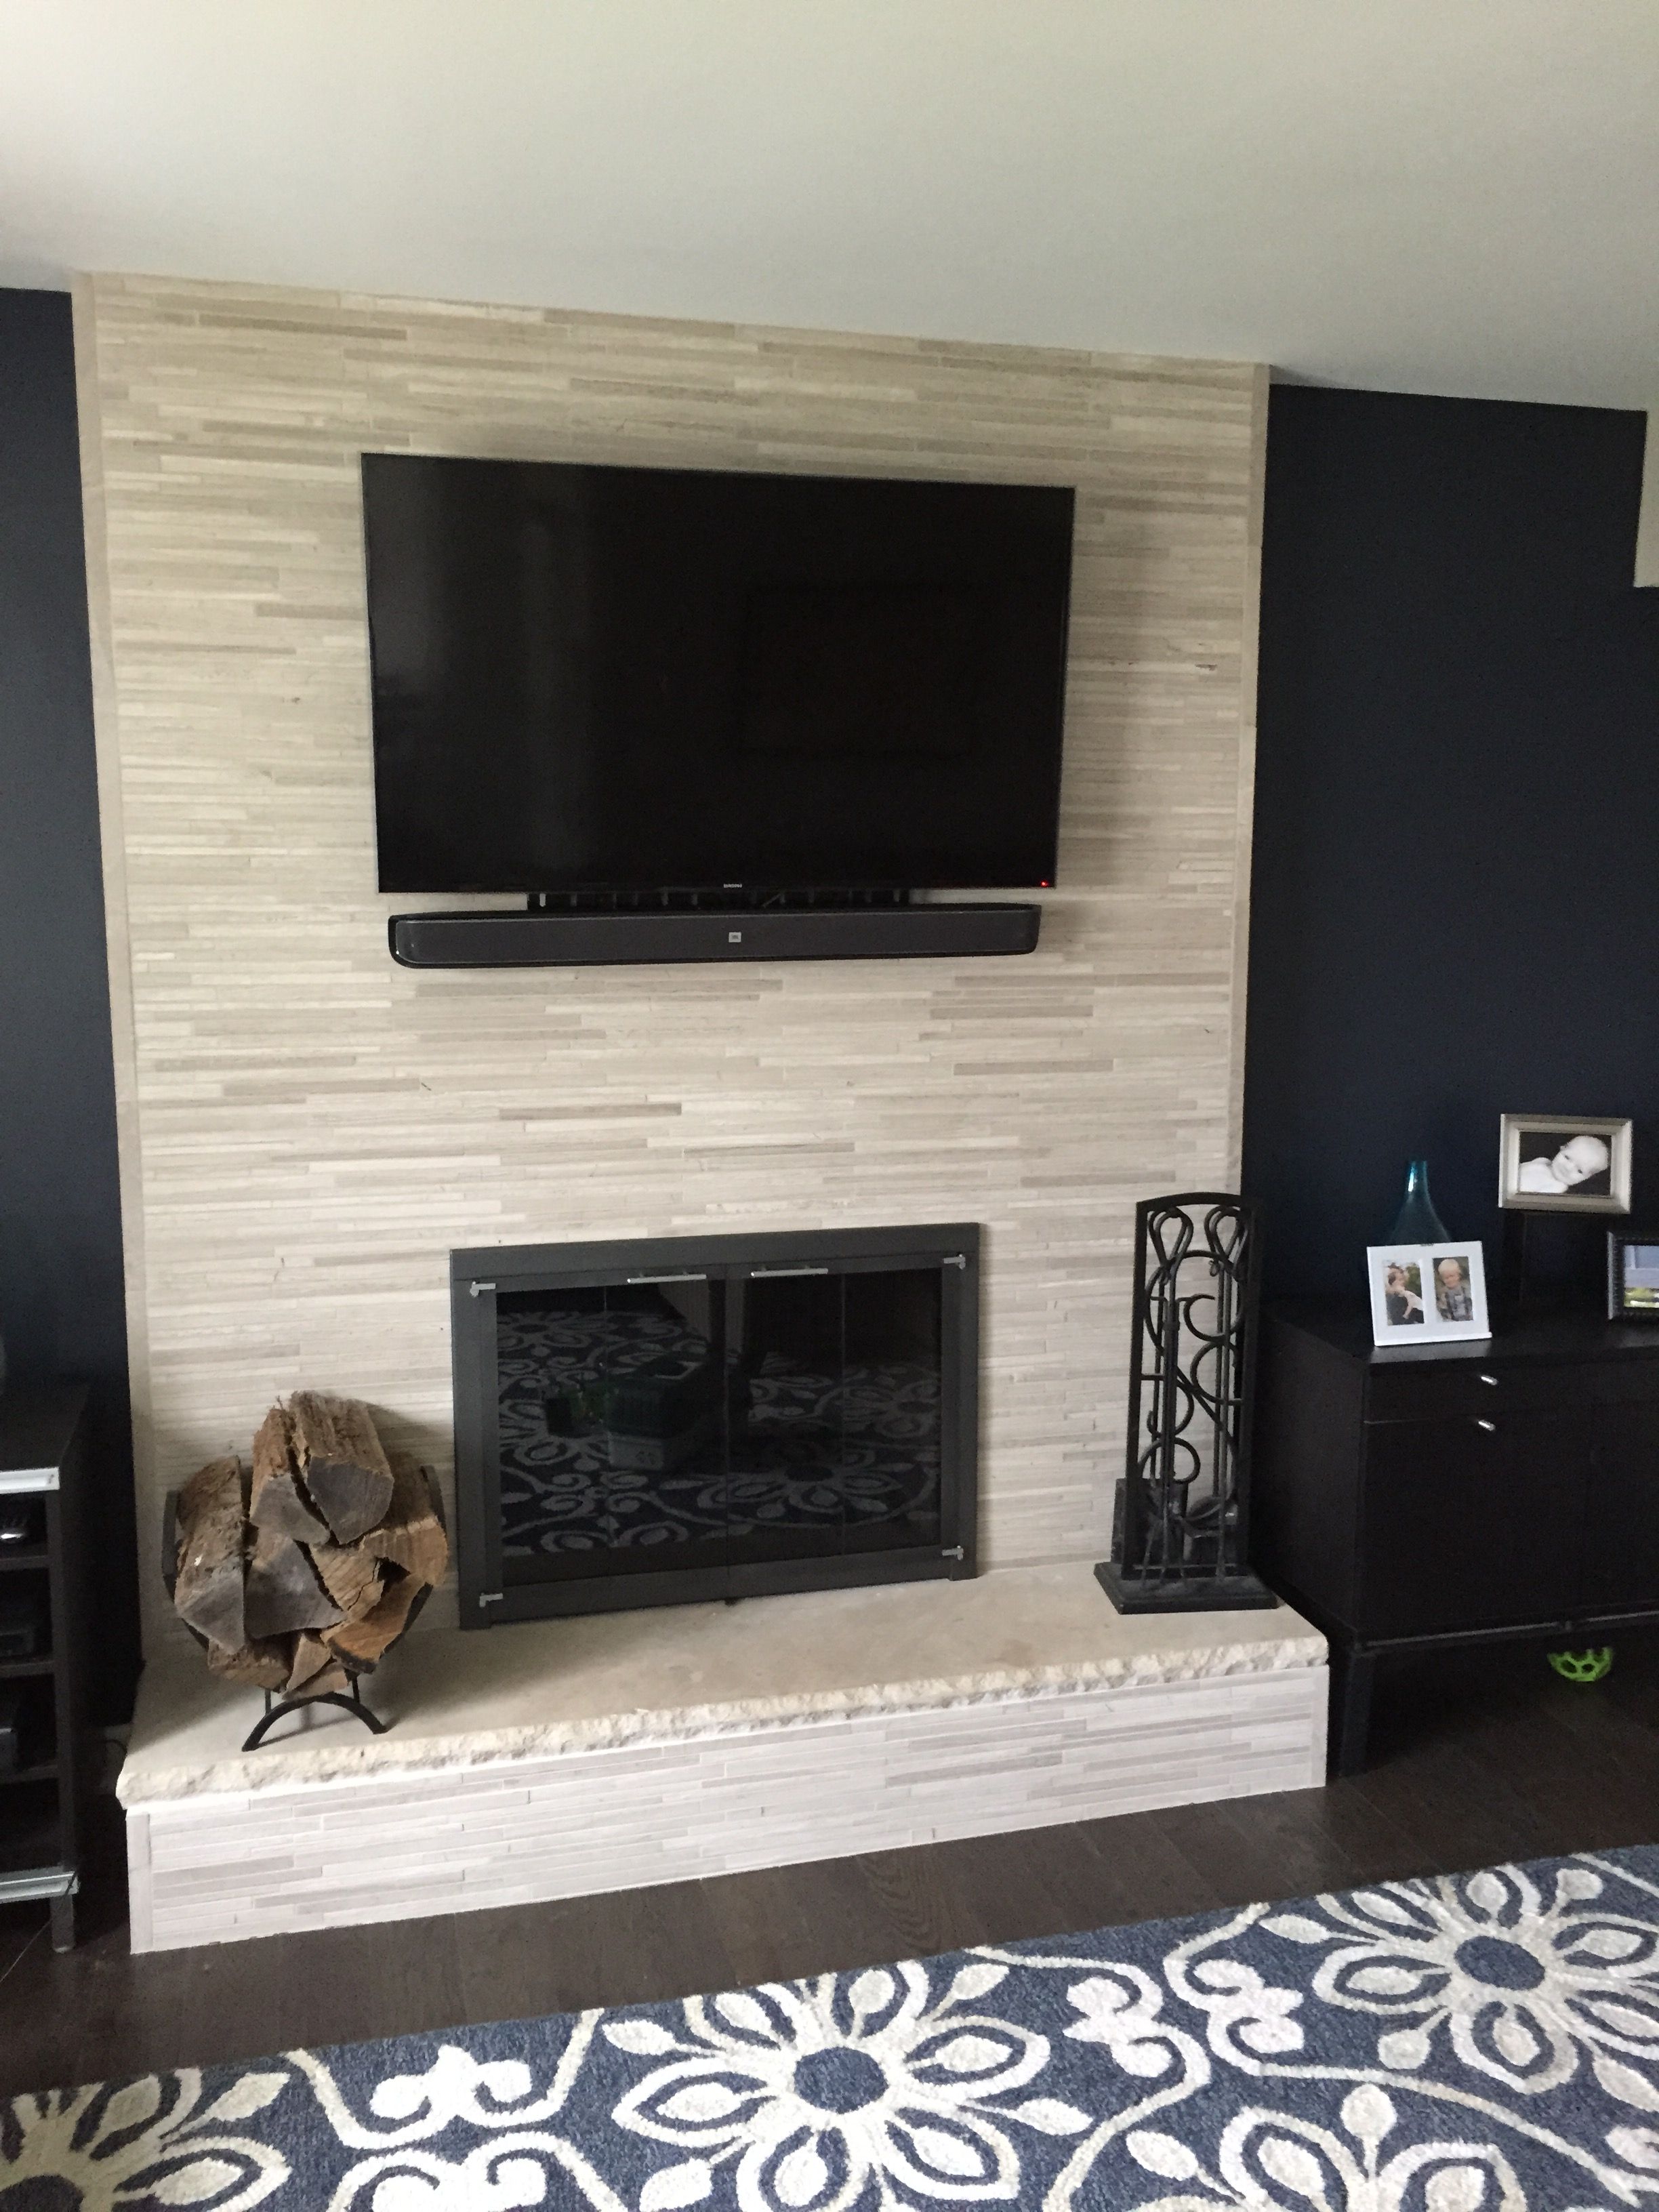 Horizontal Gas Fireplace Inspirational Our Old Fireplace Was 80 S 90 S Brick Veneer to Give It An